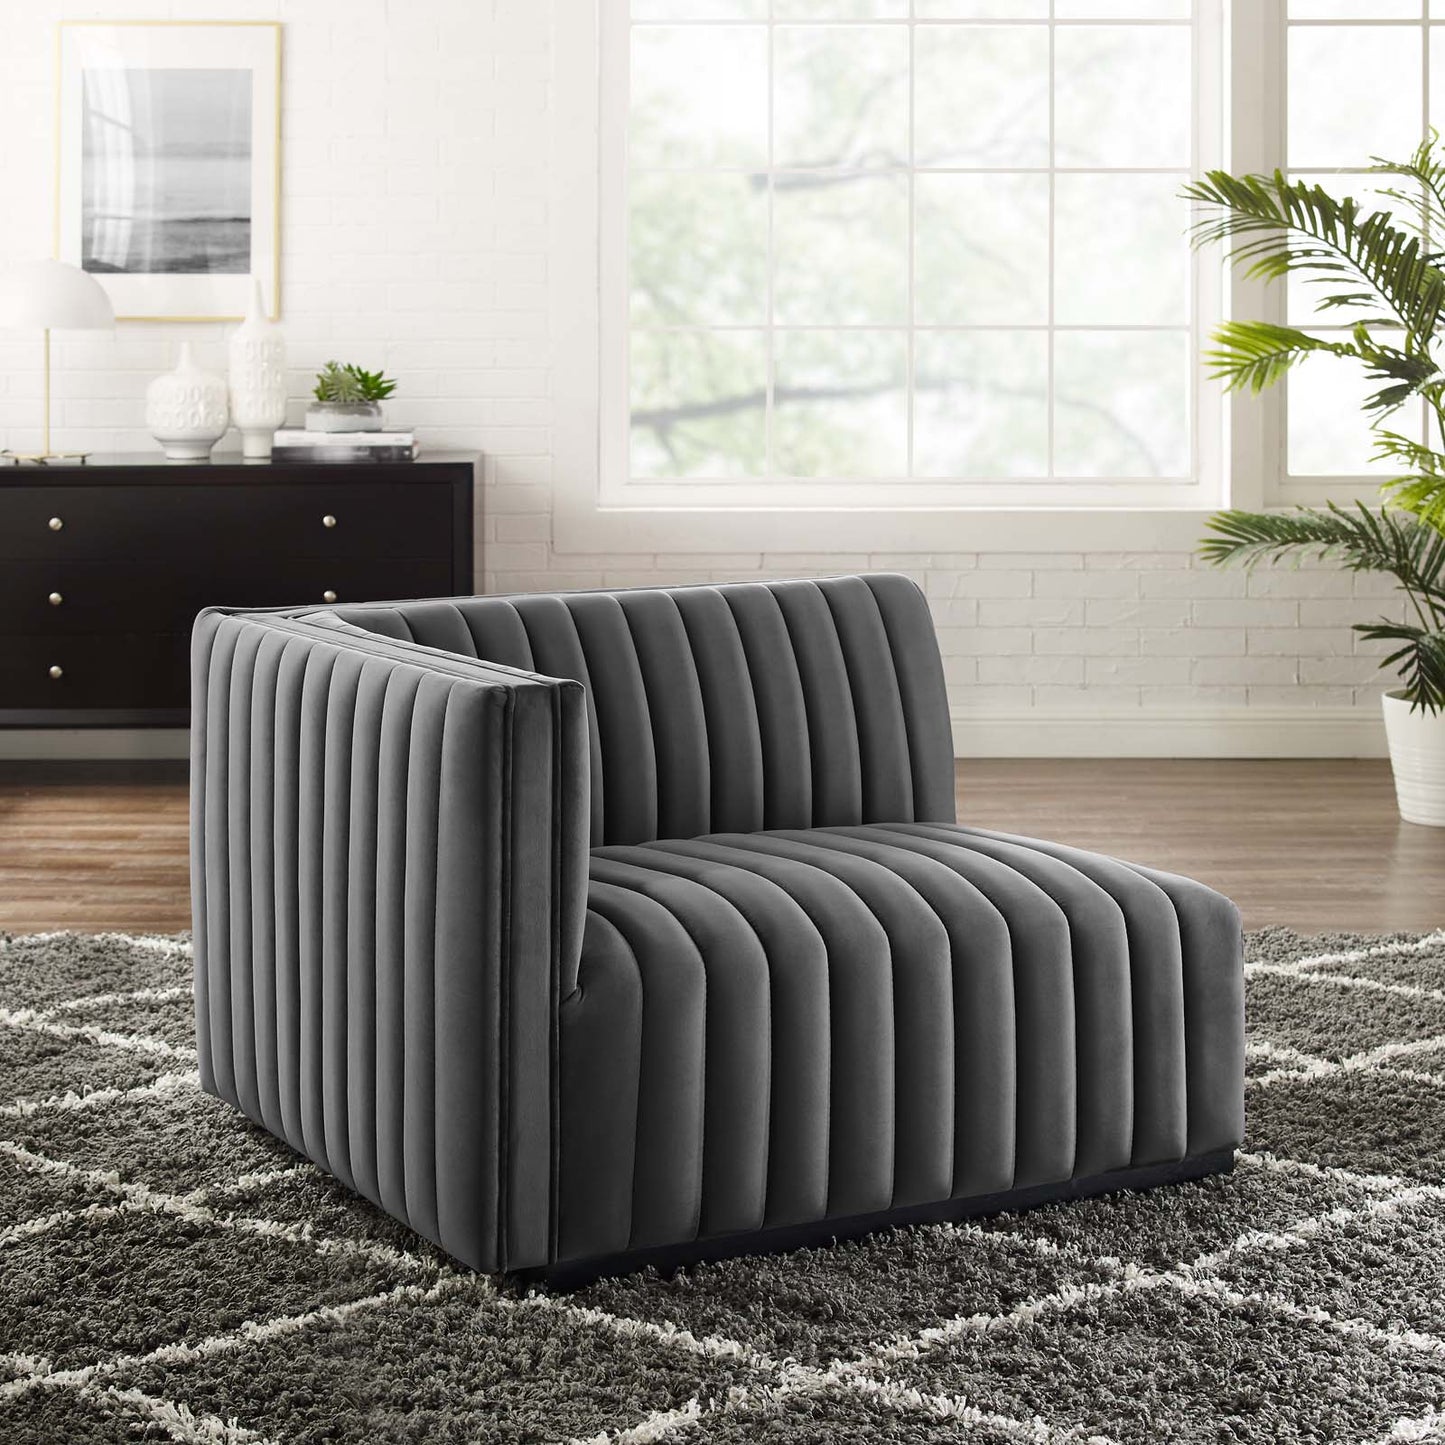 Conjure Channel Tufted Performance Velvet Left-Arm Chair Black Gray EEI-5490-BLK-GRY